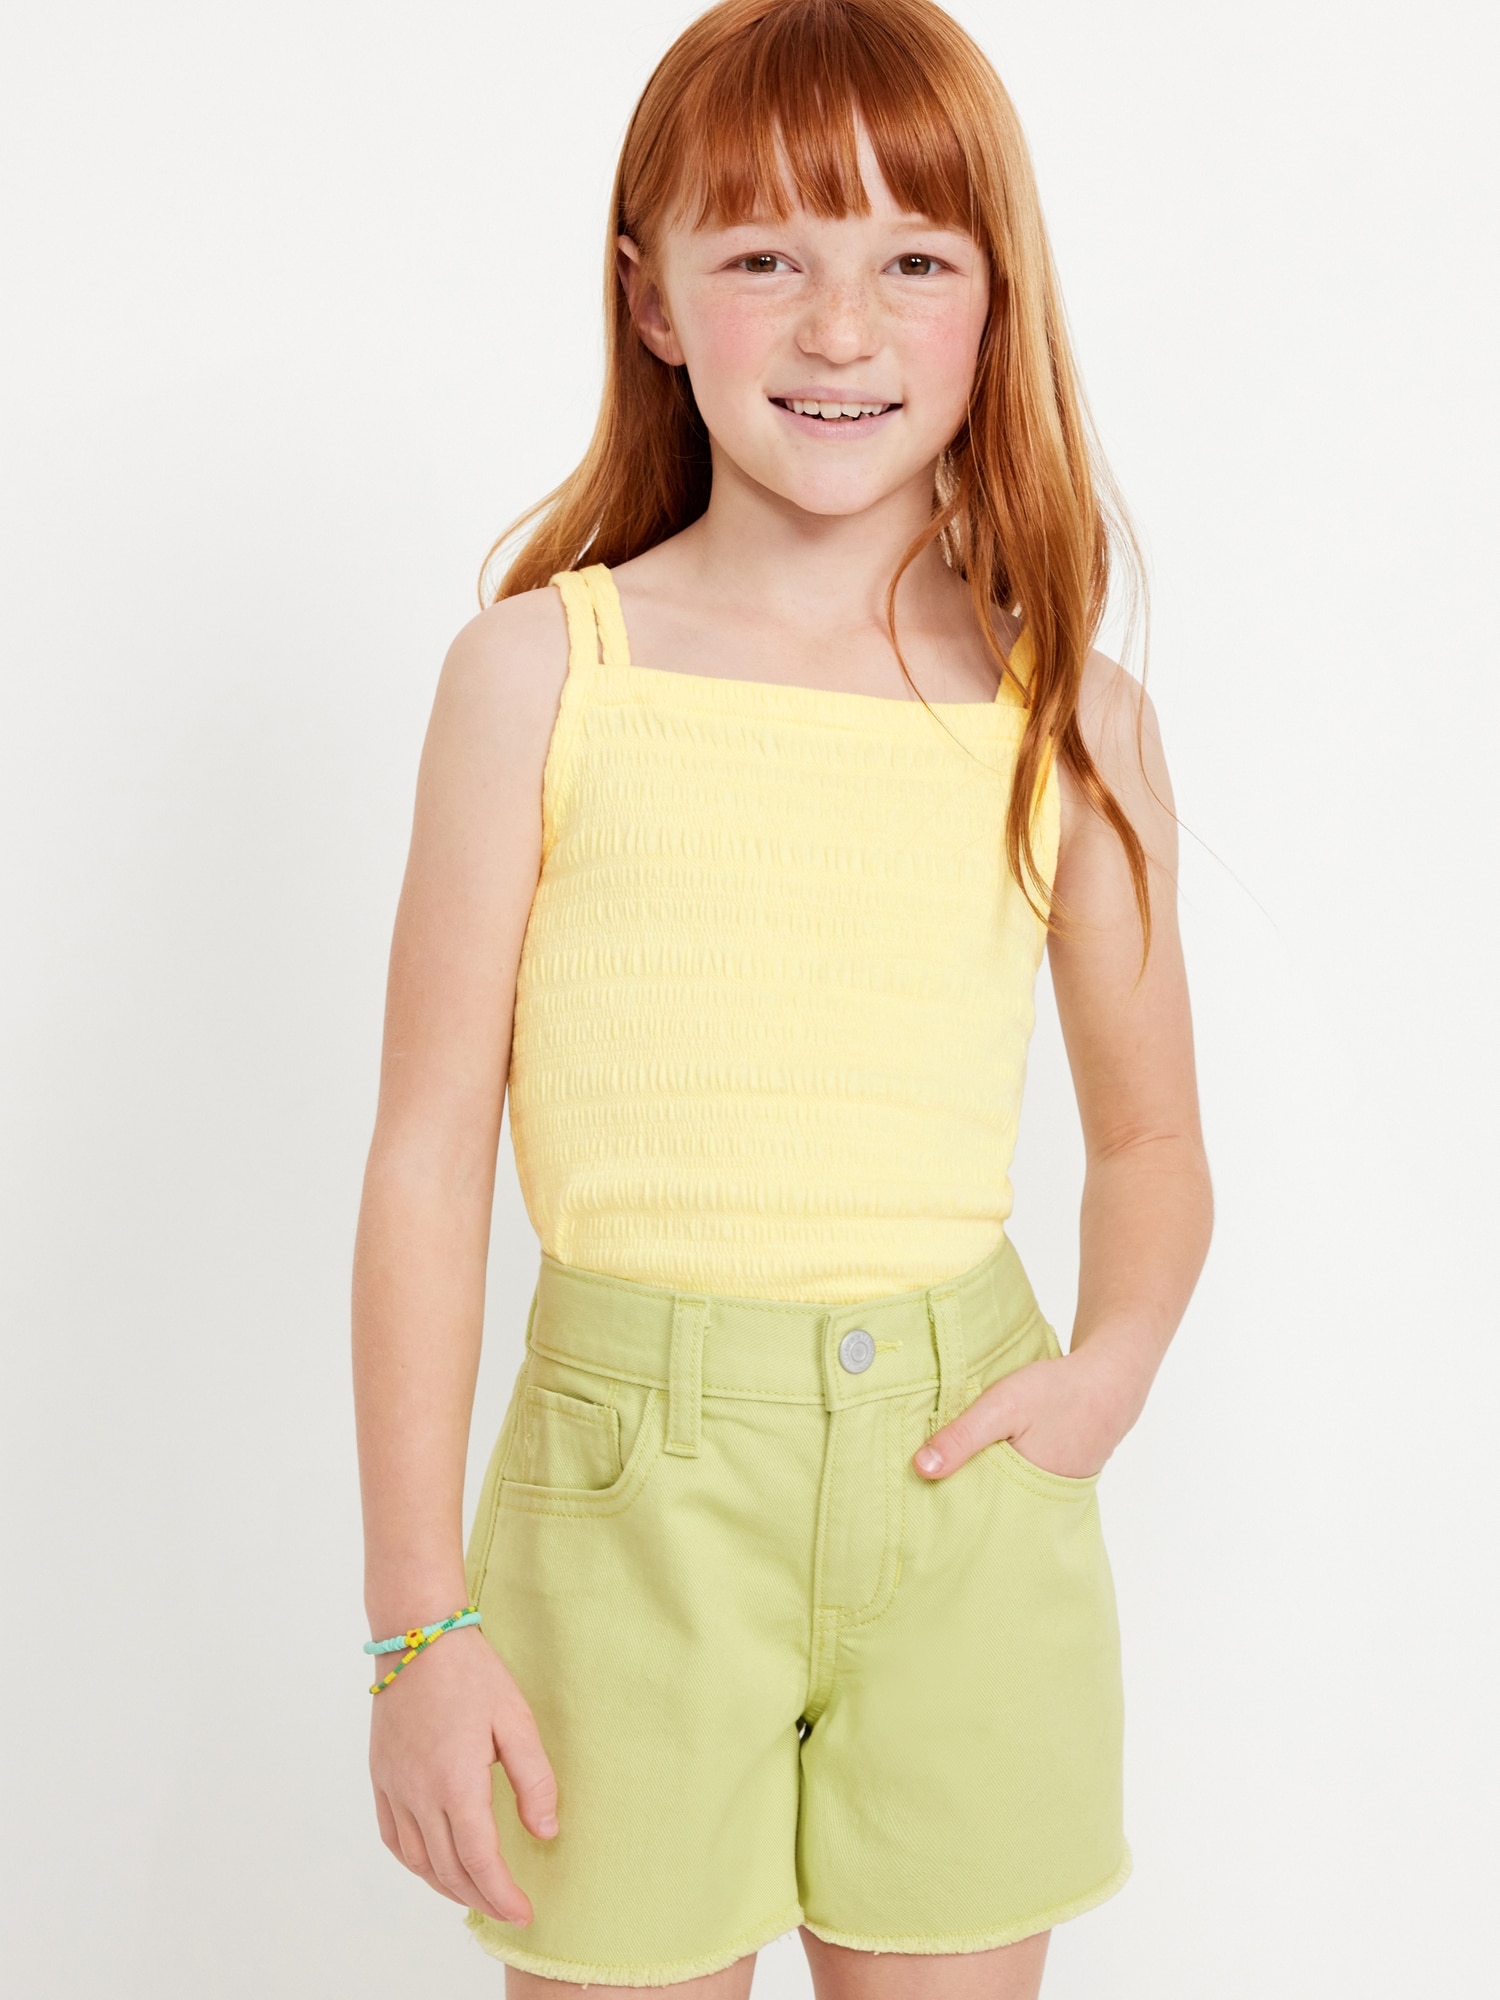 Sleeveless Fitted Smocked Tank Top for Girls